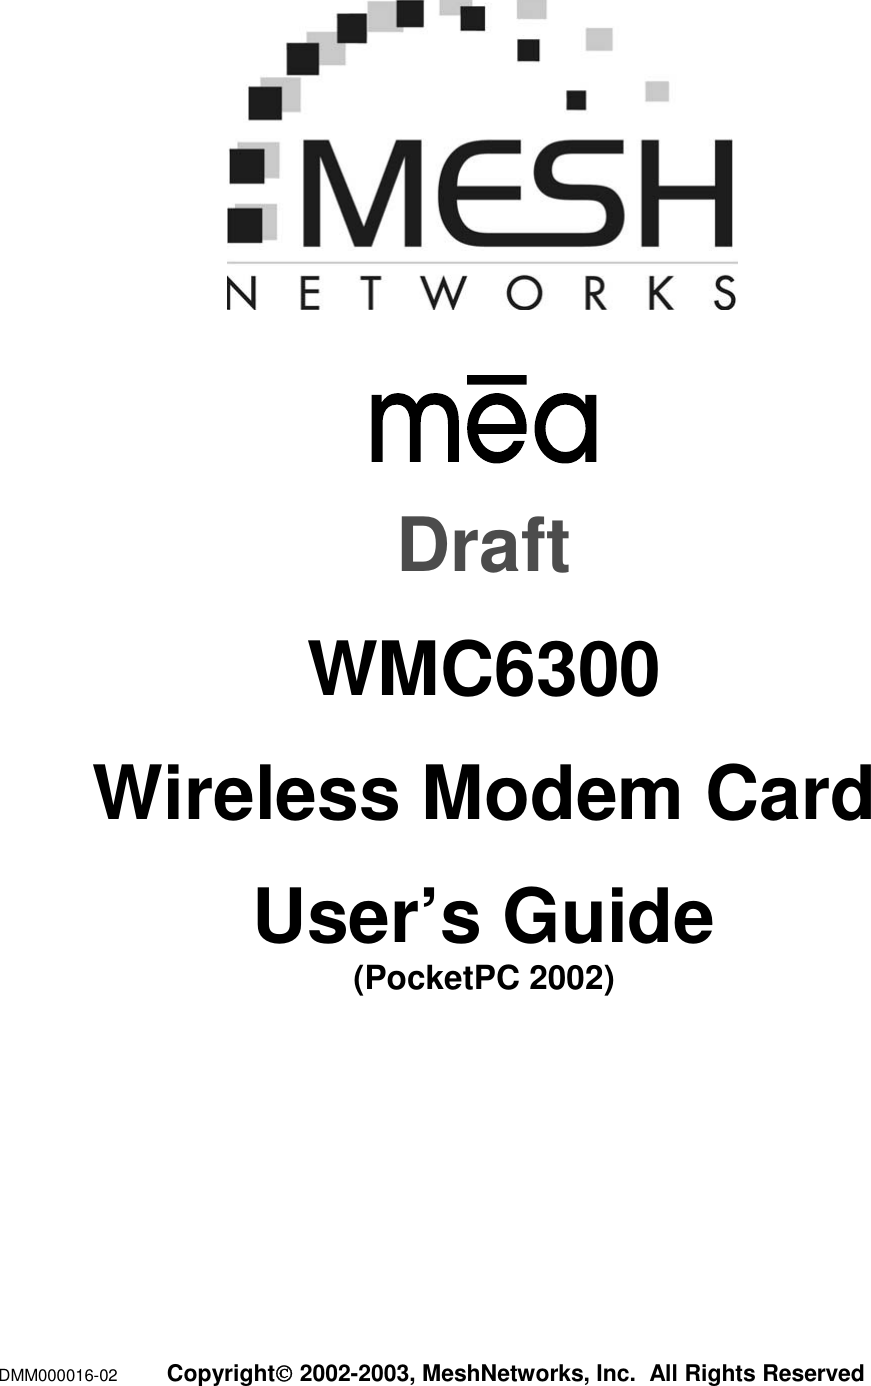  DMM000016-02  Copyright 2002-2003, MeshNetworks, Inc.  All Rights Reserved         Draft WMC6300 Wireless Modem Card User’s Guide (PocketPC 2002) 